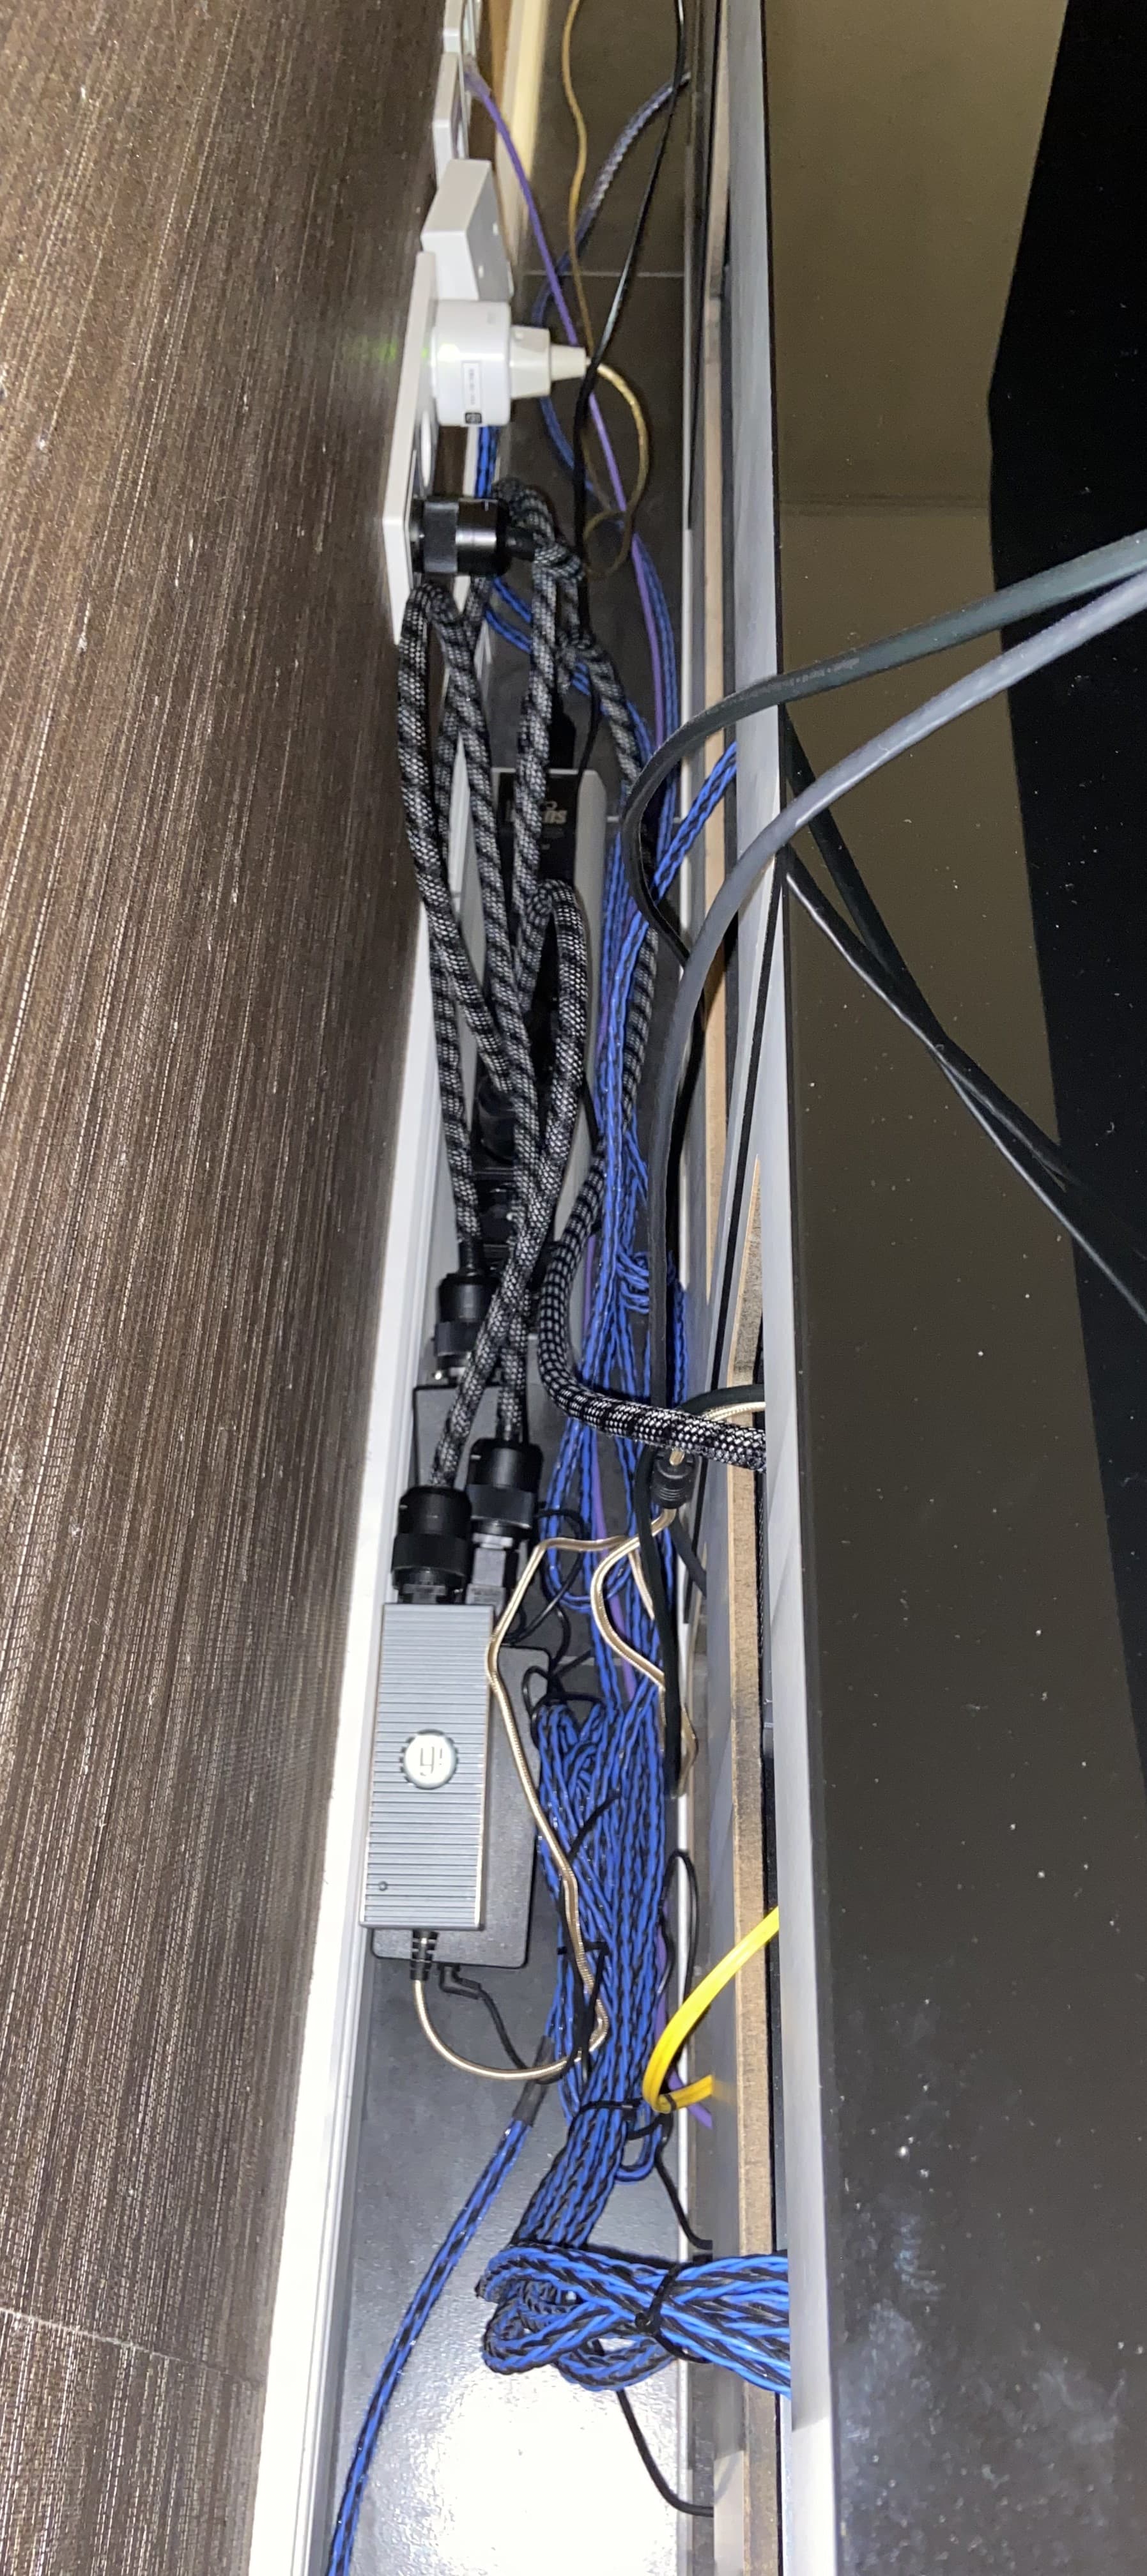 Cable Management 101 - Please share your tips, successes and failures -  Audio Gear Talk - Roon Labs Community